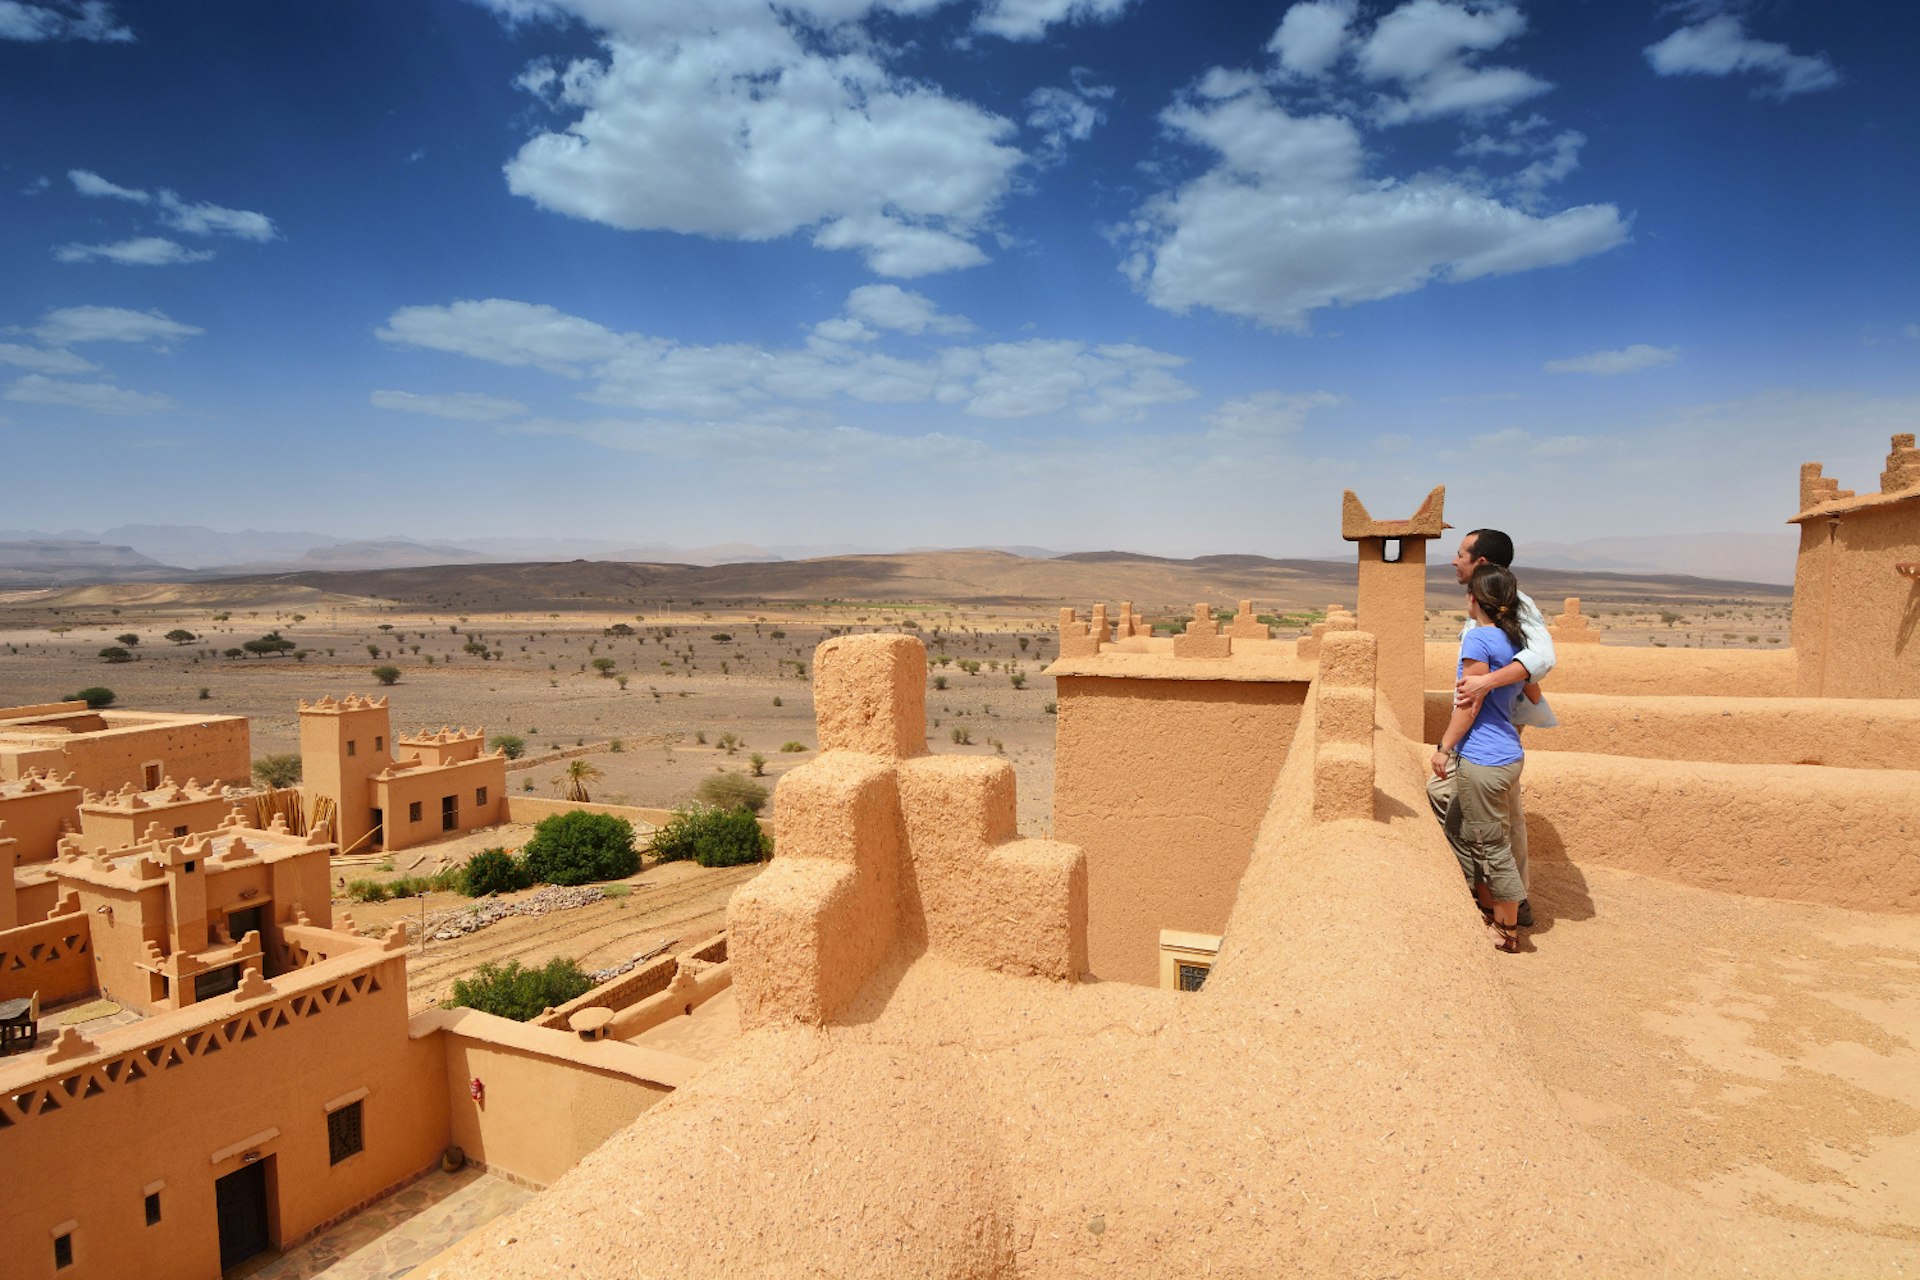 Young couple in a kasbah looking out at a view of a sand-colored city